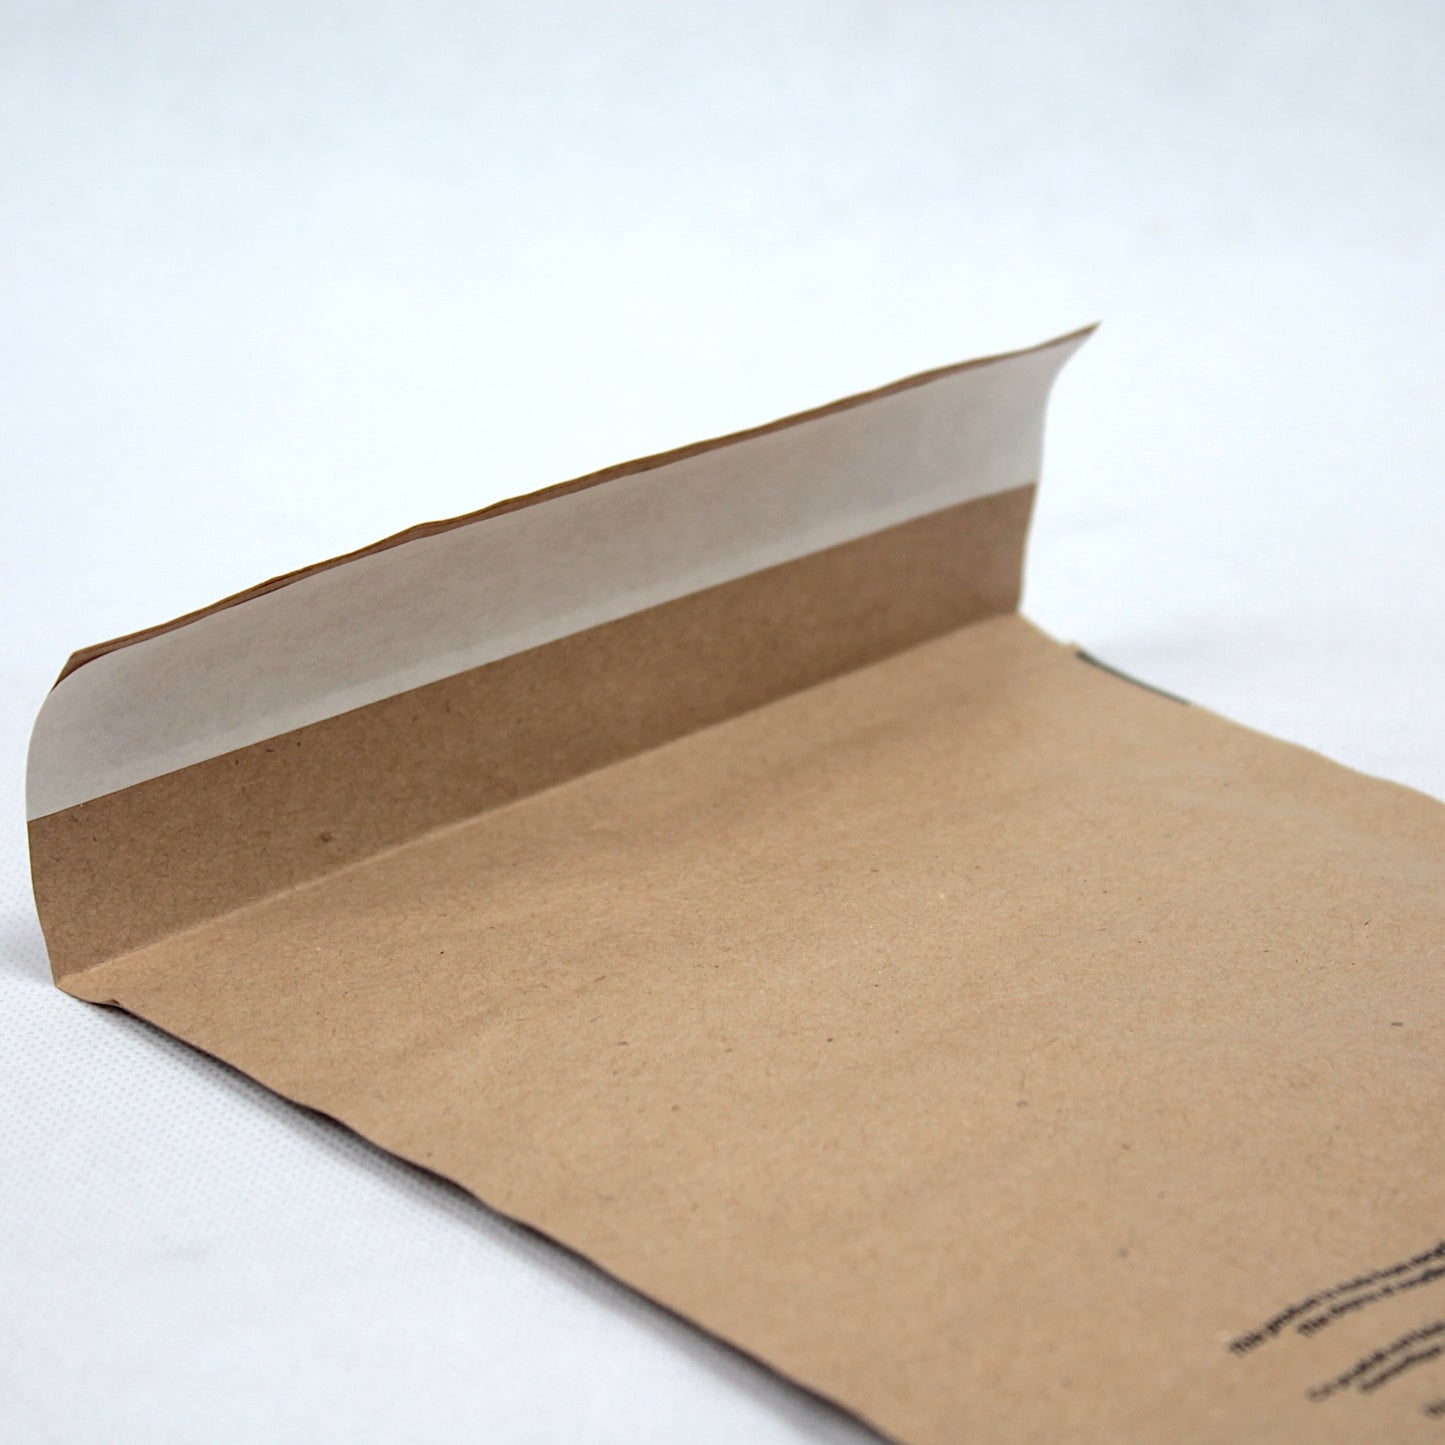 225x130mm Recyclable Padded Envelopes - Pack of 100